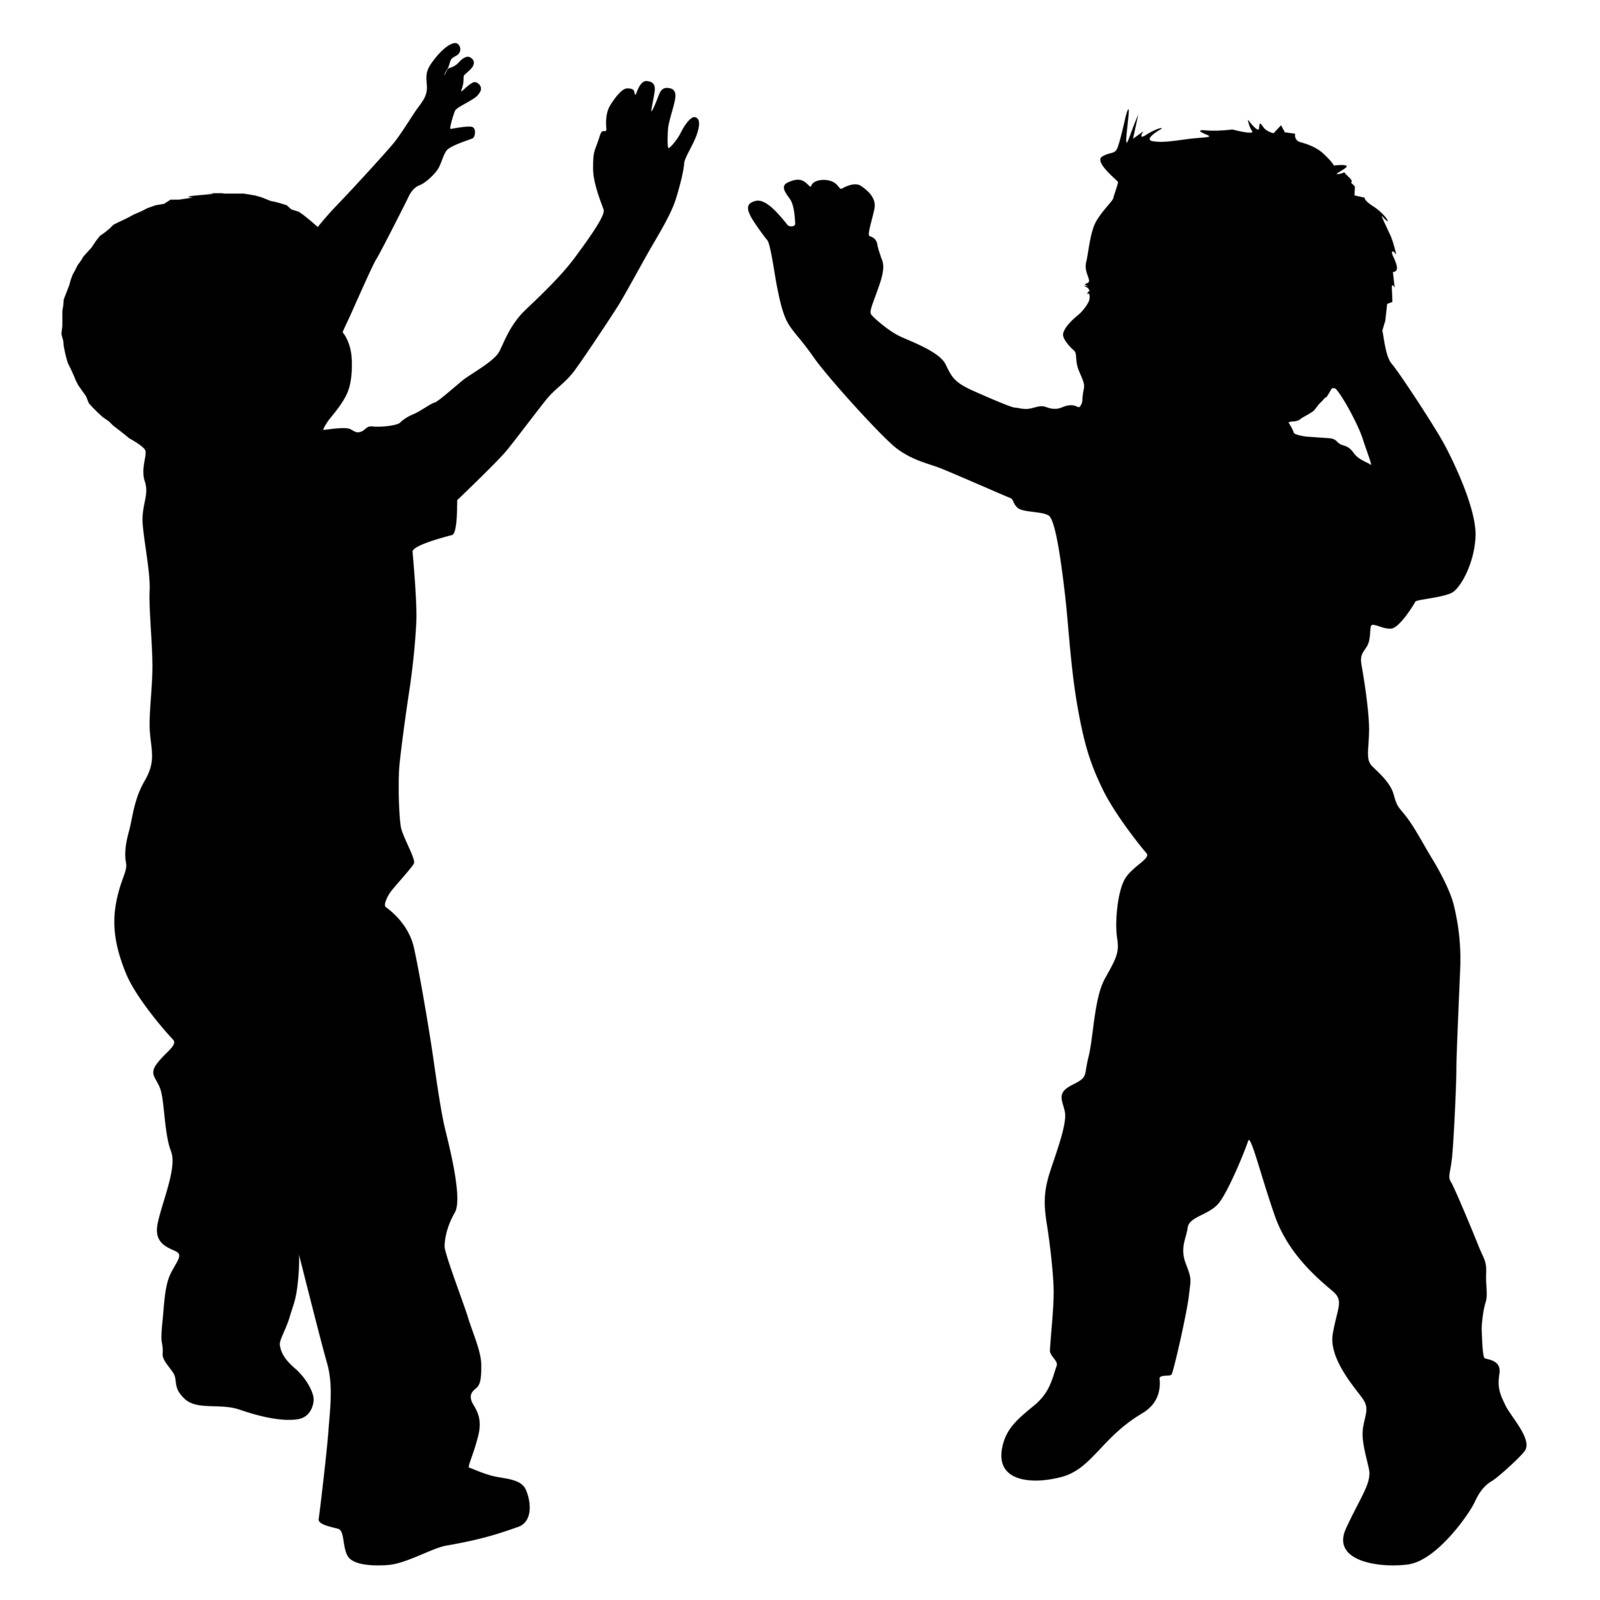 Silhouettes of two little boys who play